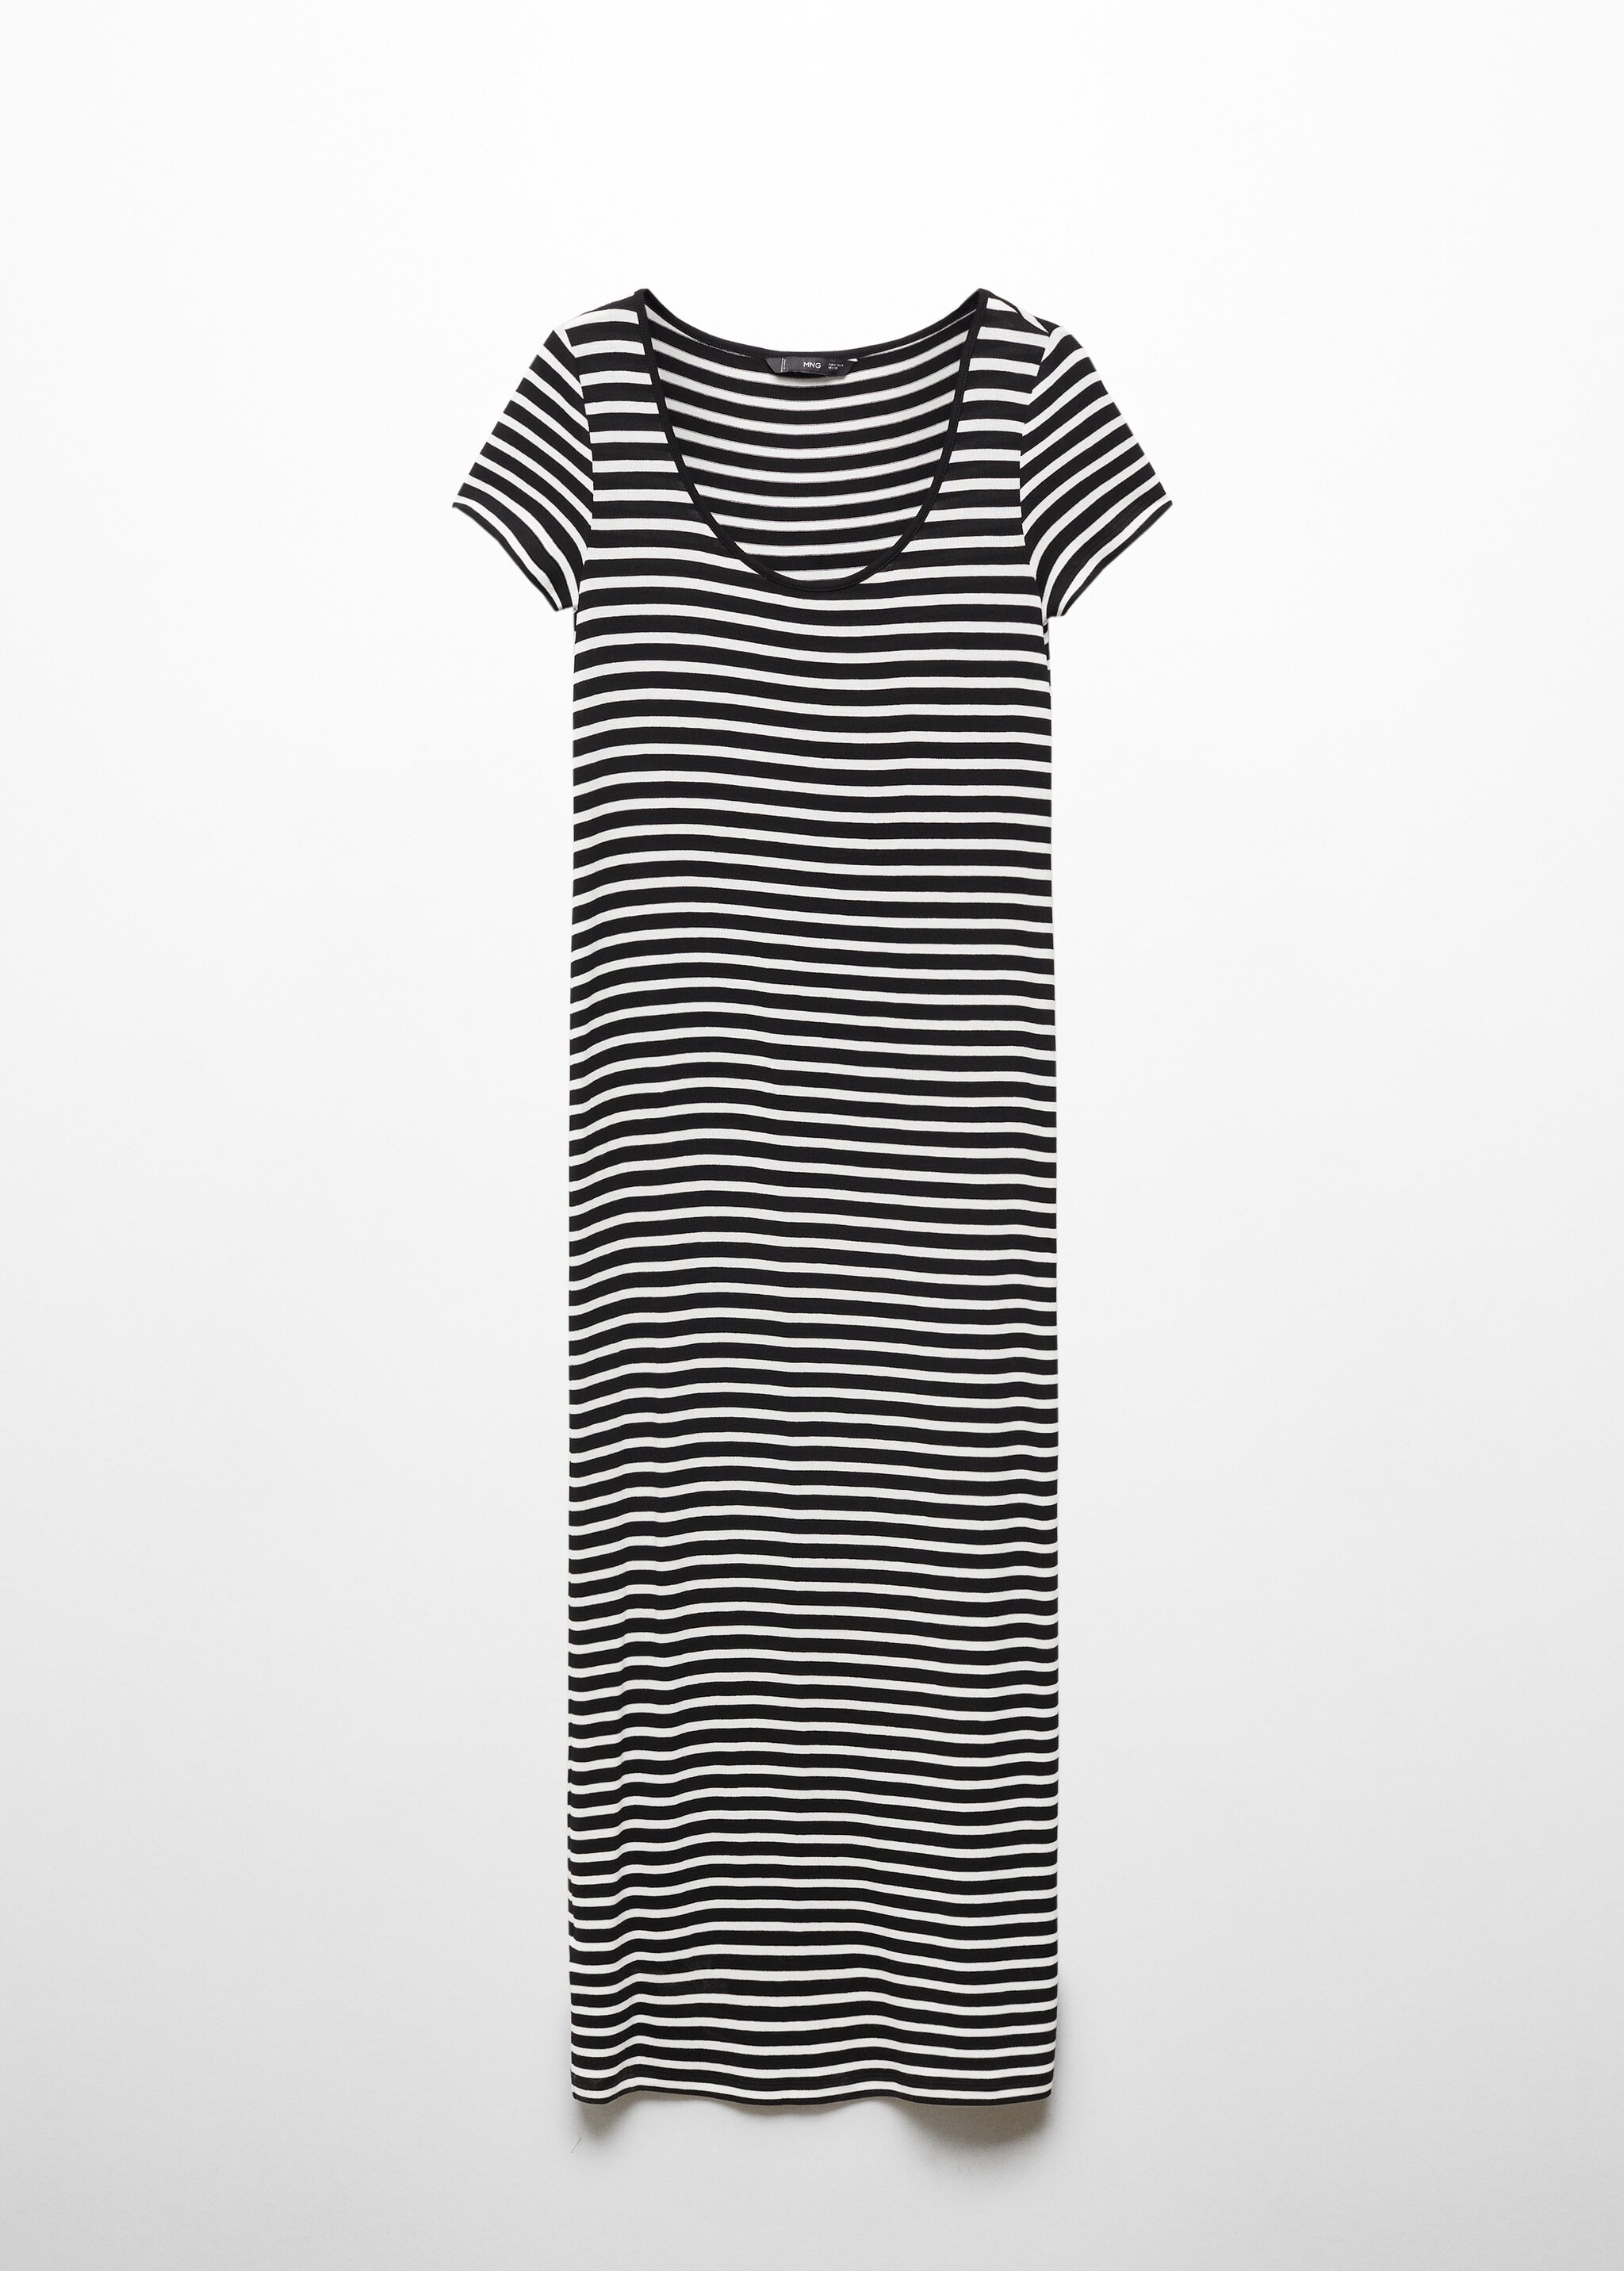 Short-sleeved striped dress - Article without model